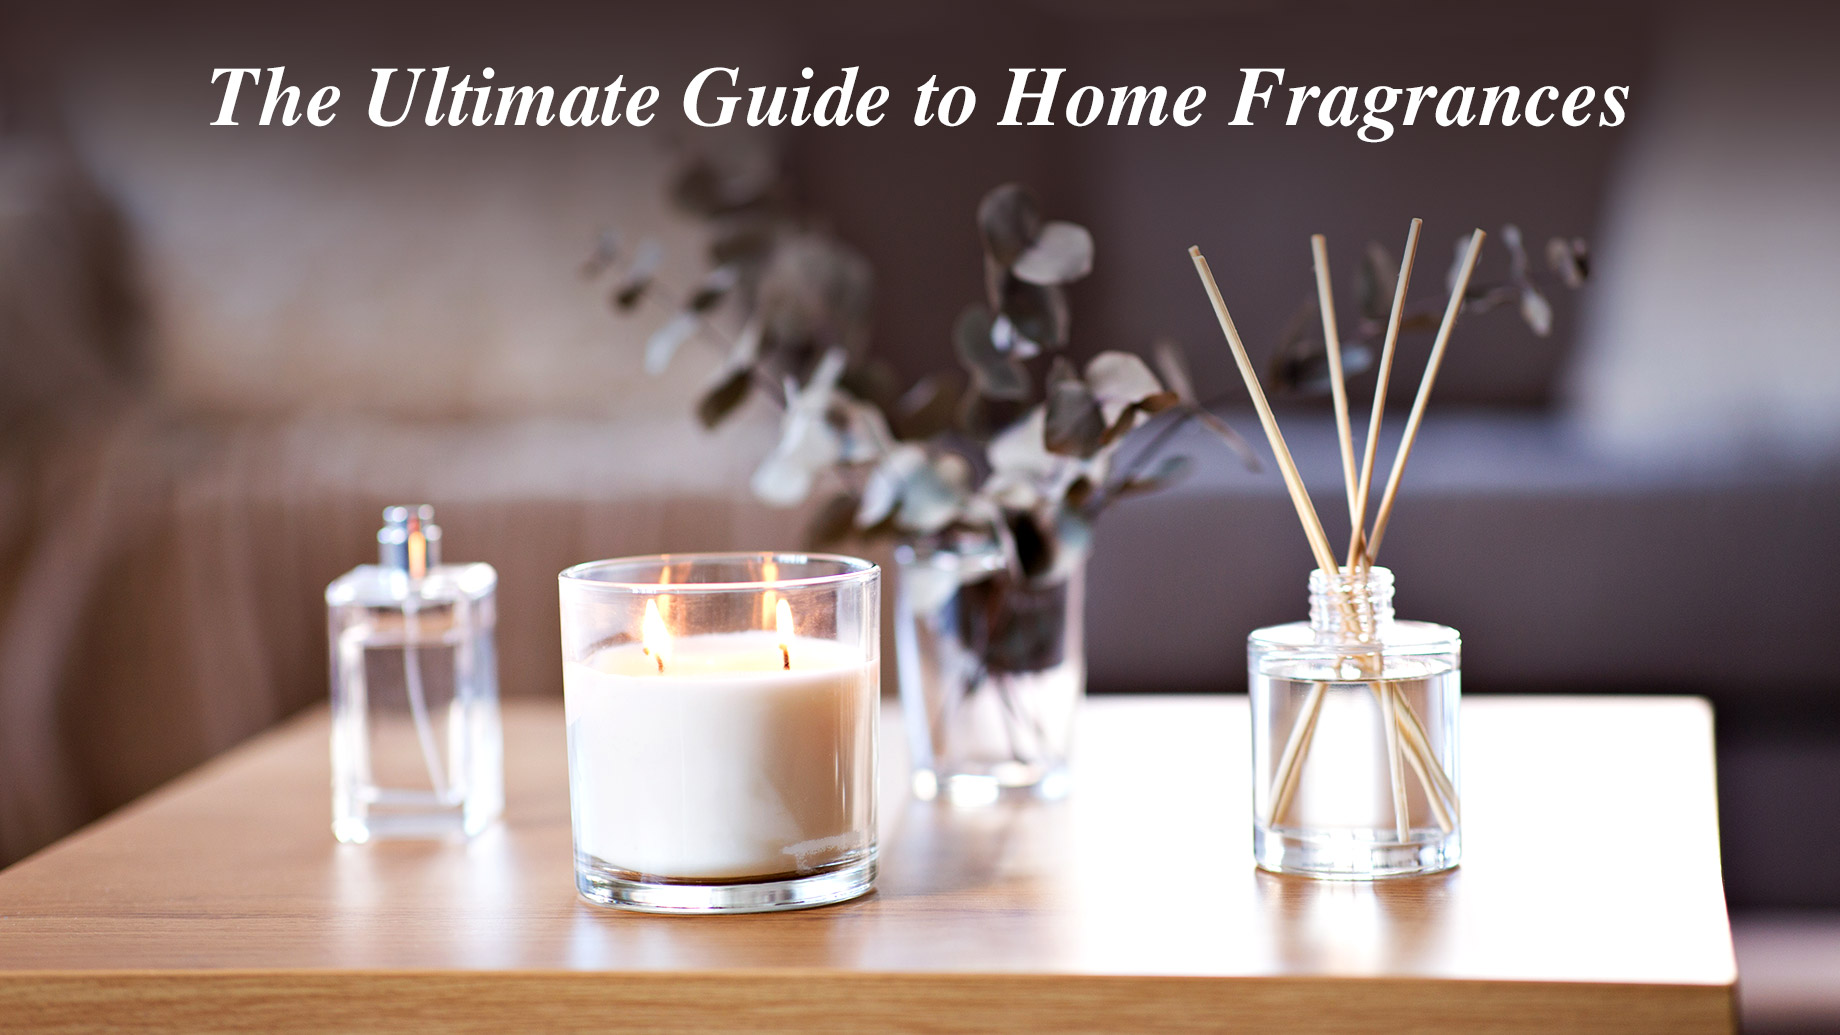 The Ultimate Guide to Home Fragrances